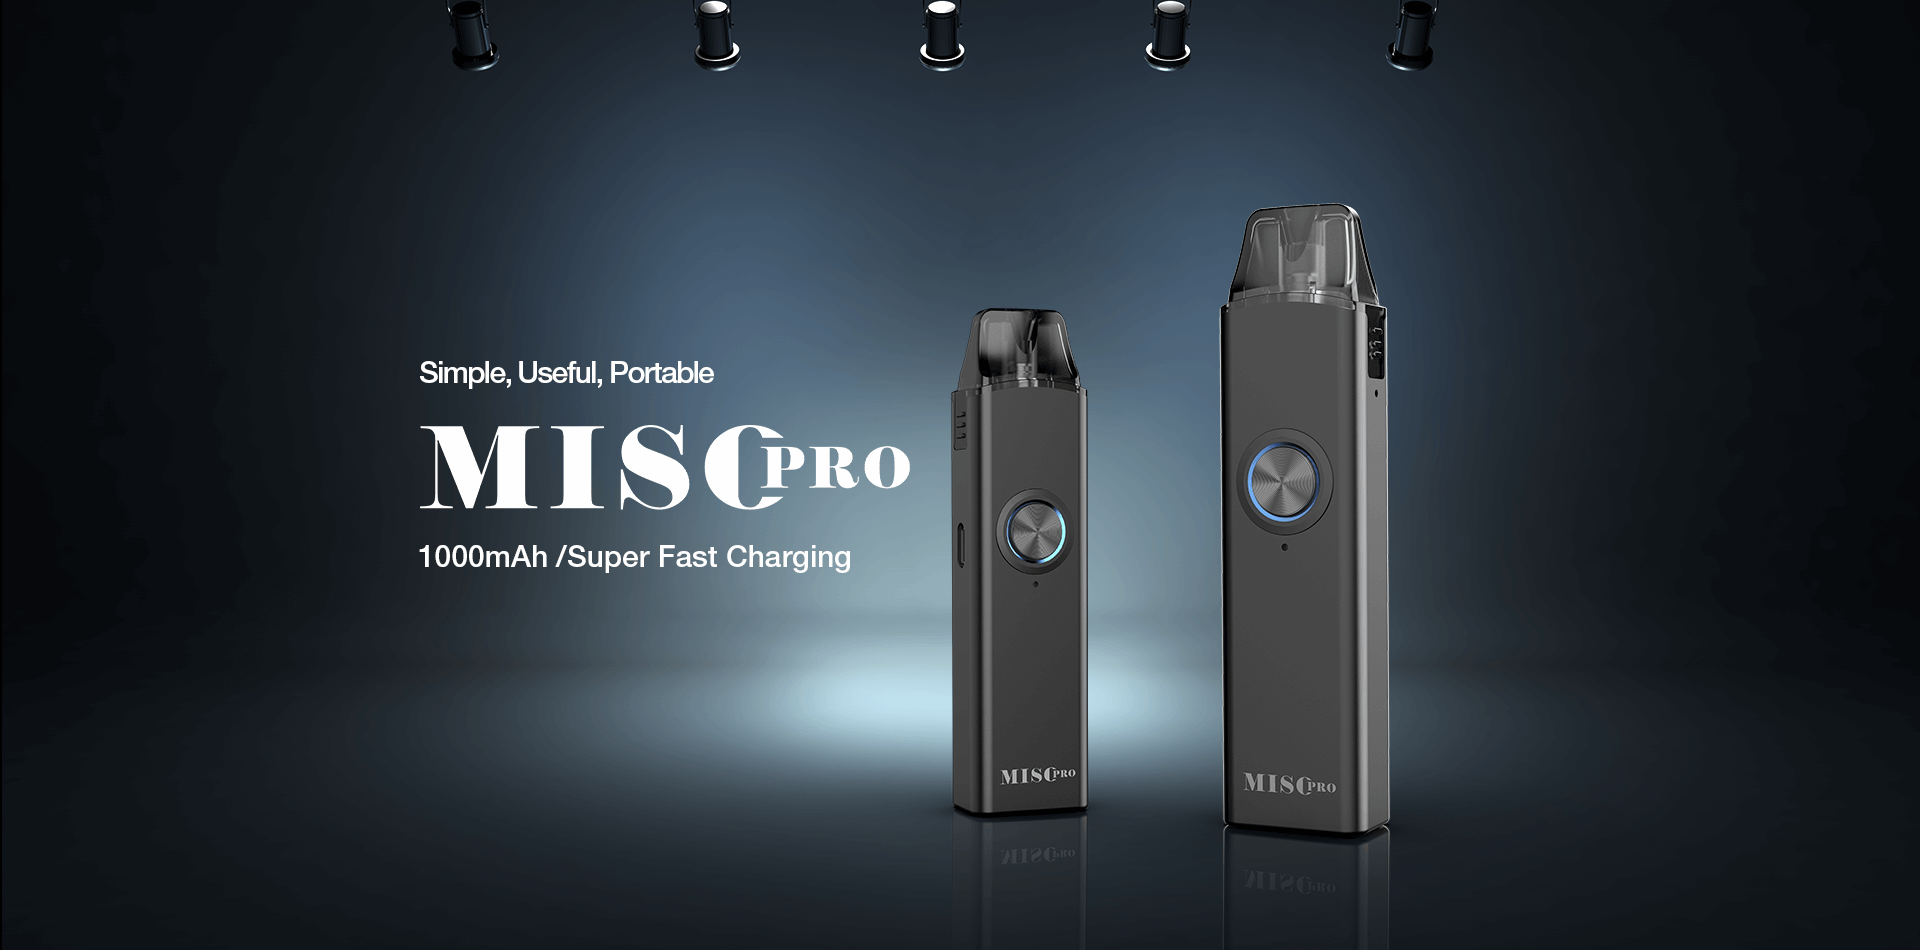 Effortlessly Powerful Simply Beautifui - Lightweight yet robust, the UNIVAPO  Miso Pro is designed for optimal portability.-4